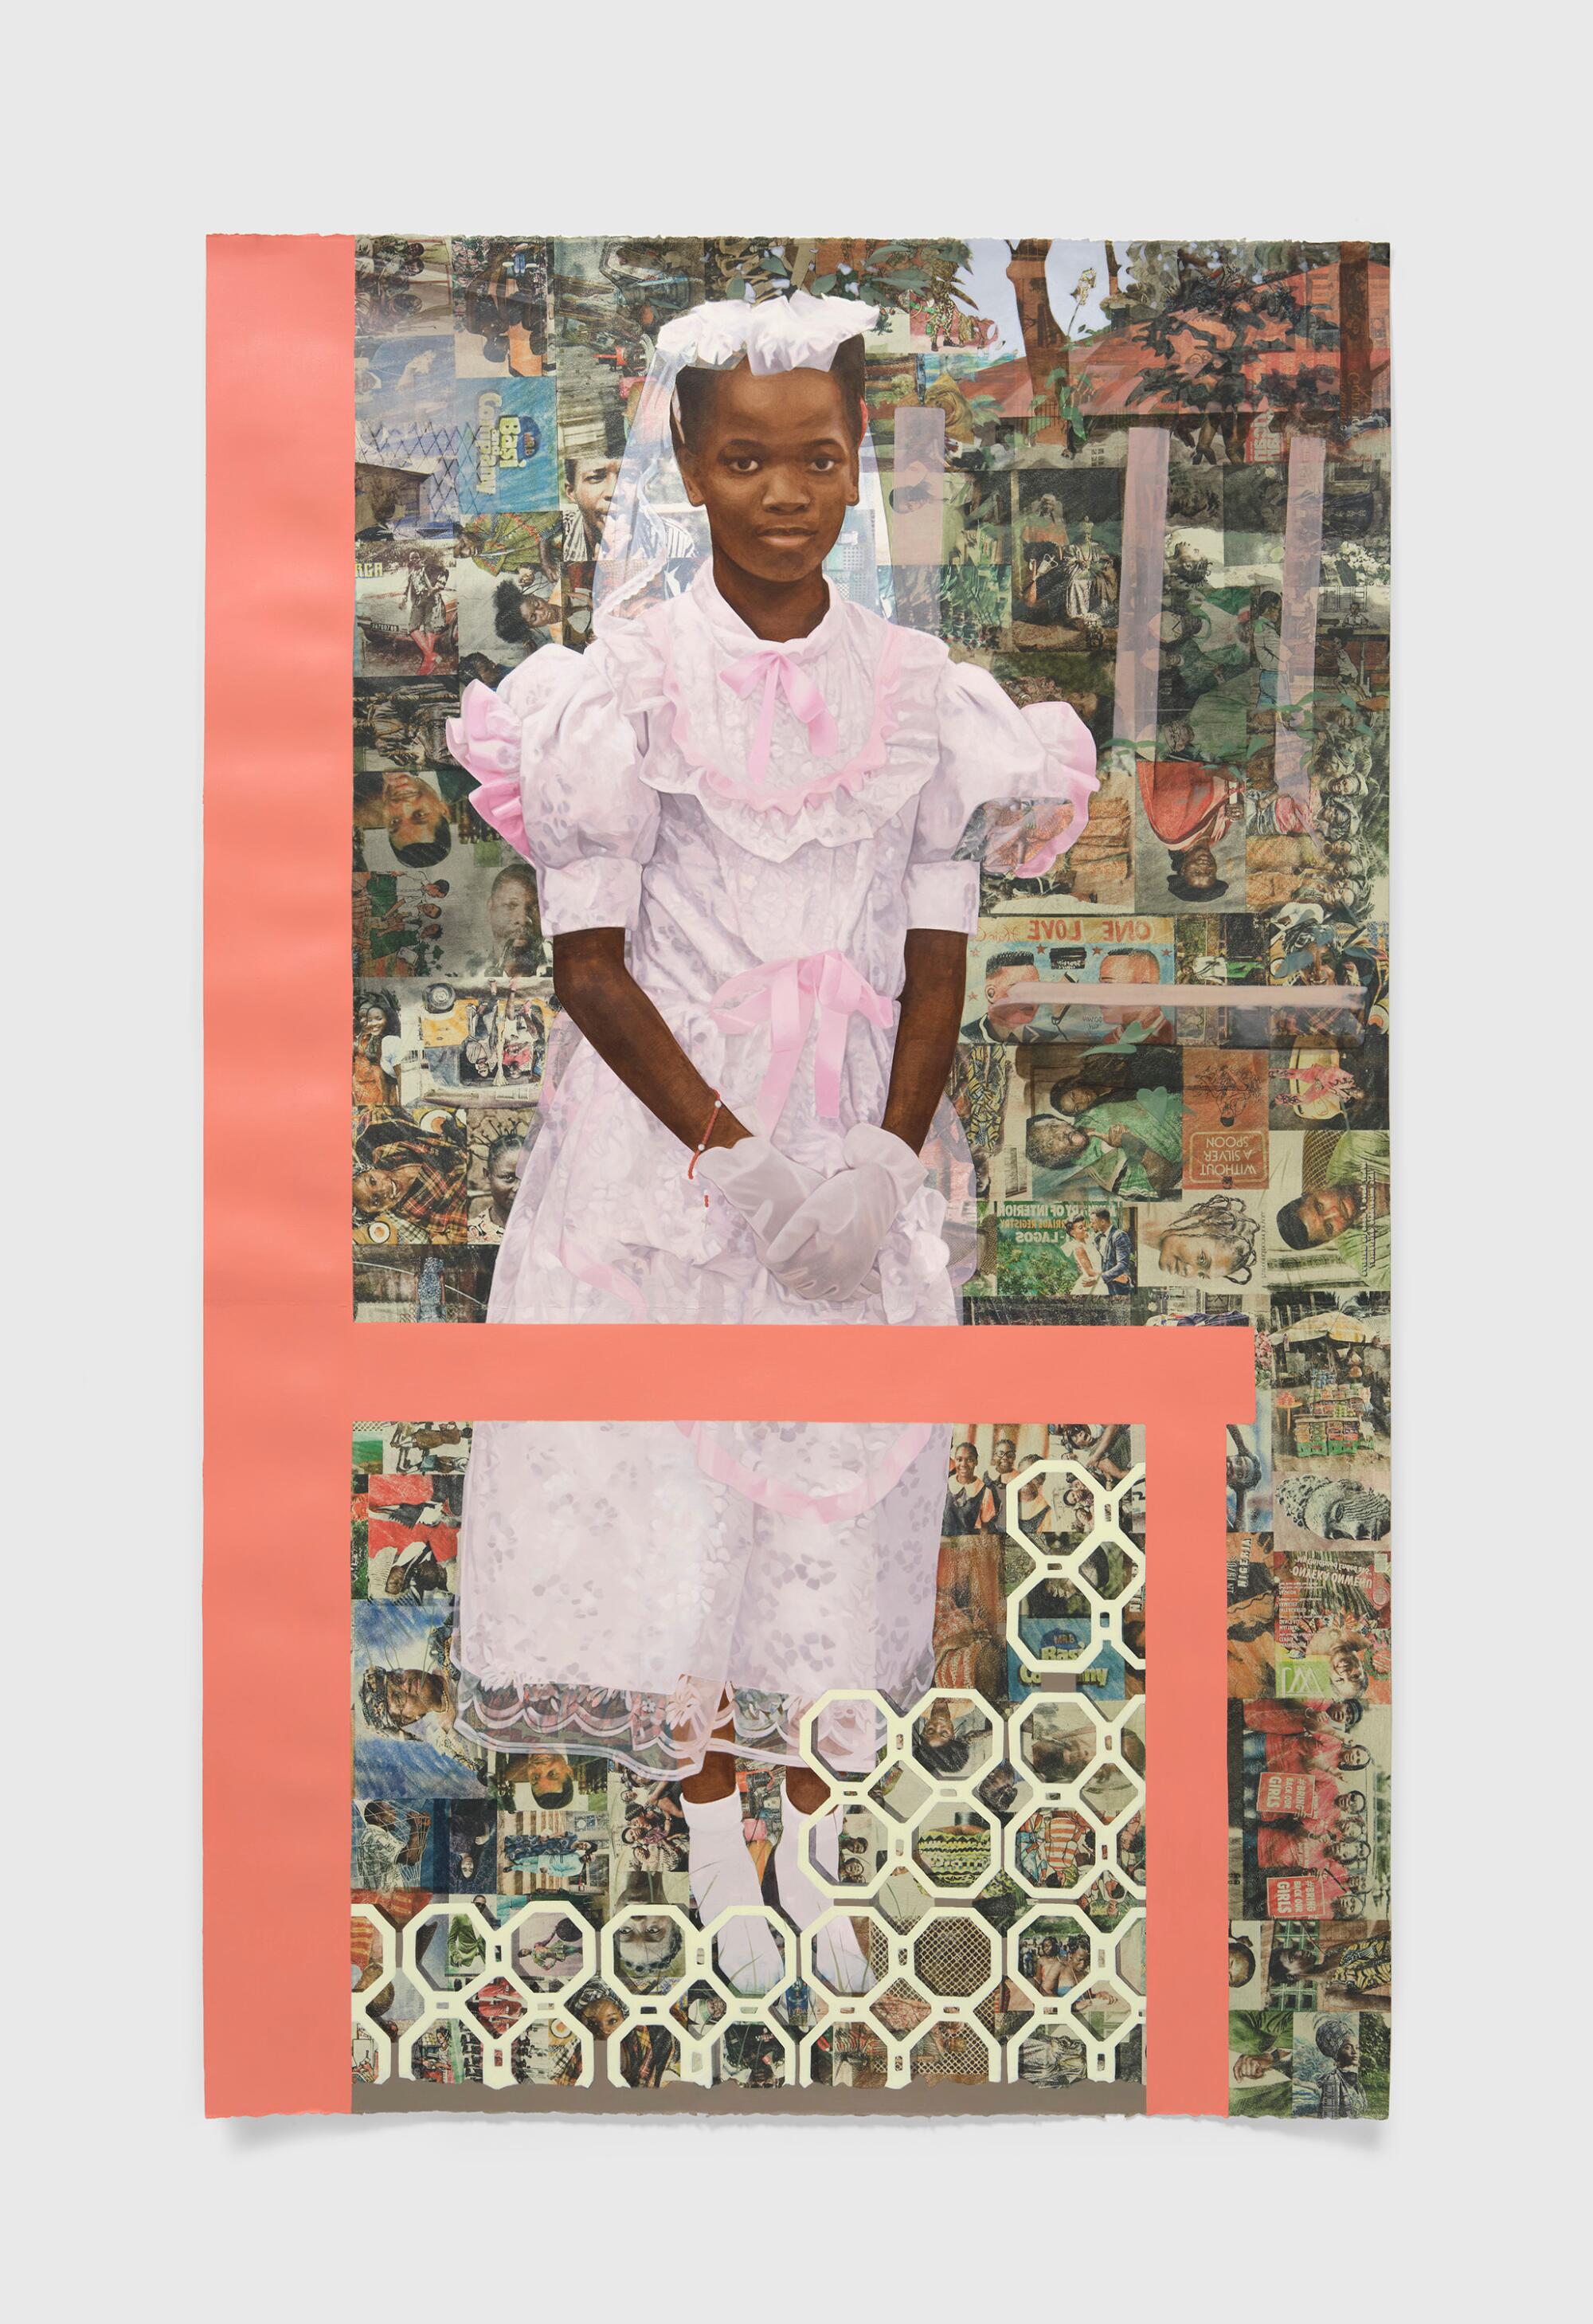 Njideka Akunyili Crosby, "The Beautyful Ones" Series #11, 2023. Acrylic, colored pencil, and transfers on paper.